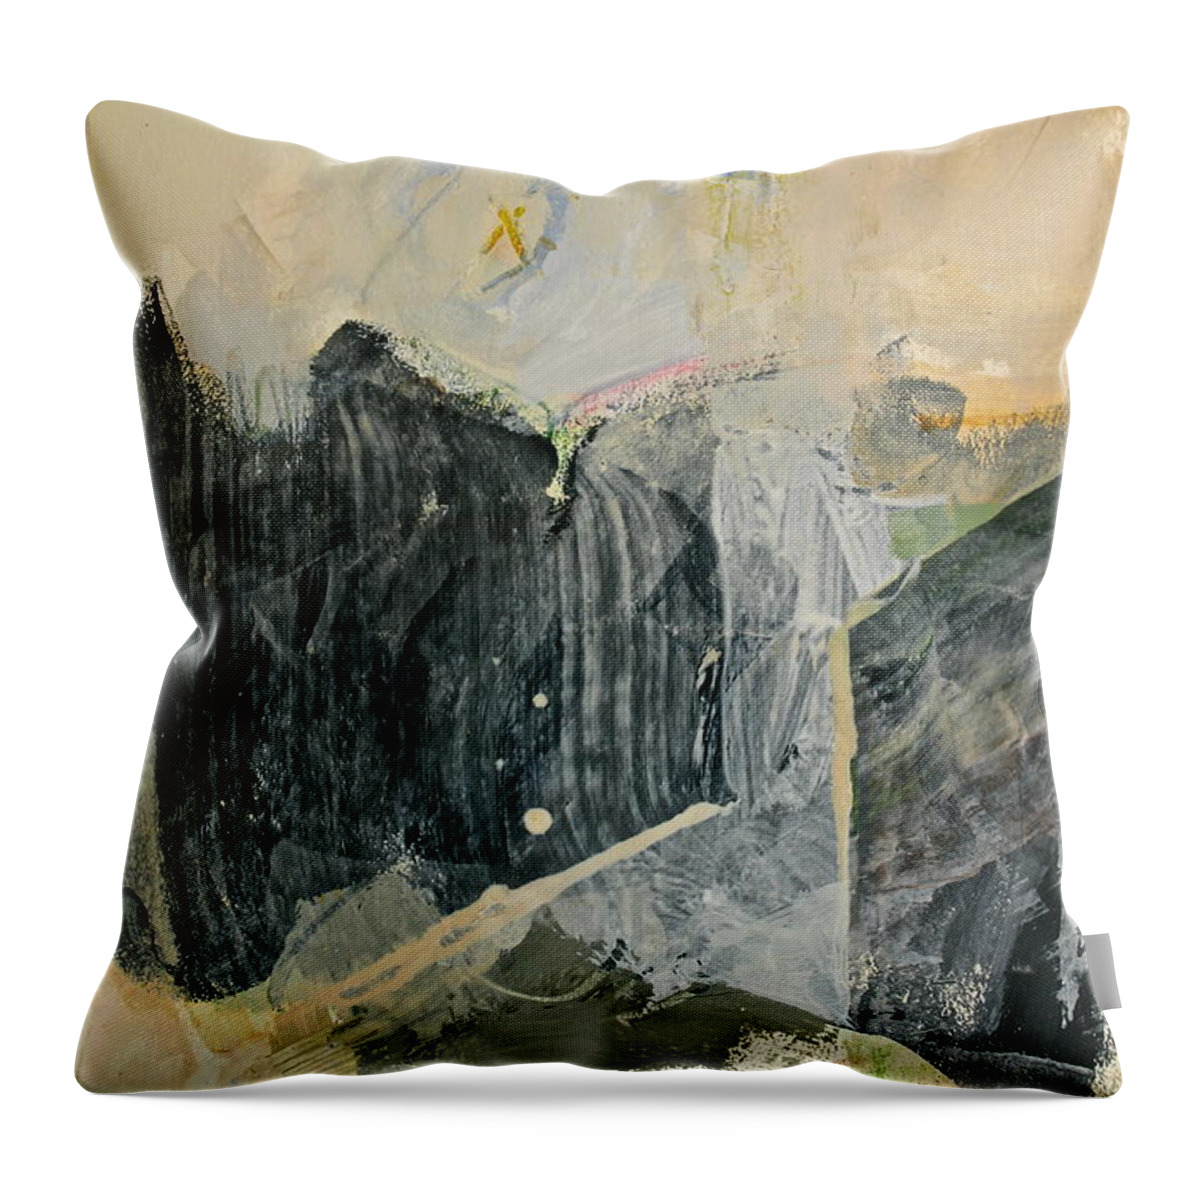 Abstract Paintings Throw Pillow featuring the painting Hits And Mrs or Kami Hito e Detail by Cliff Spohn